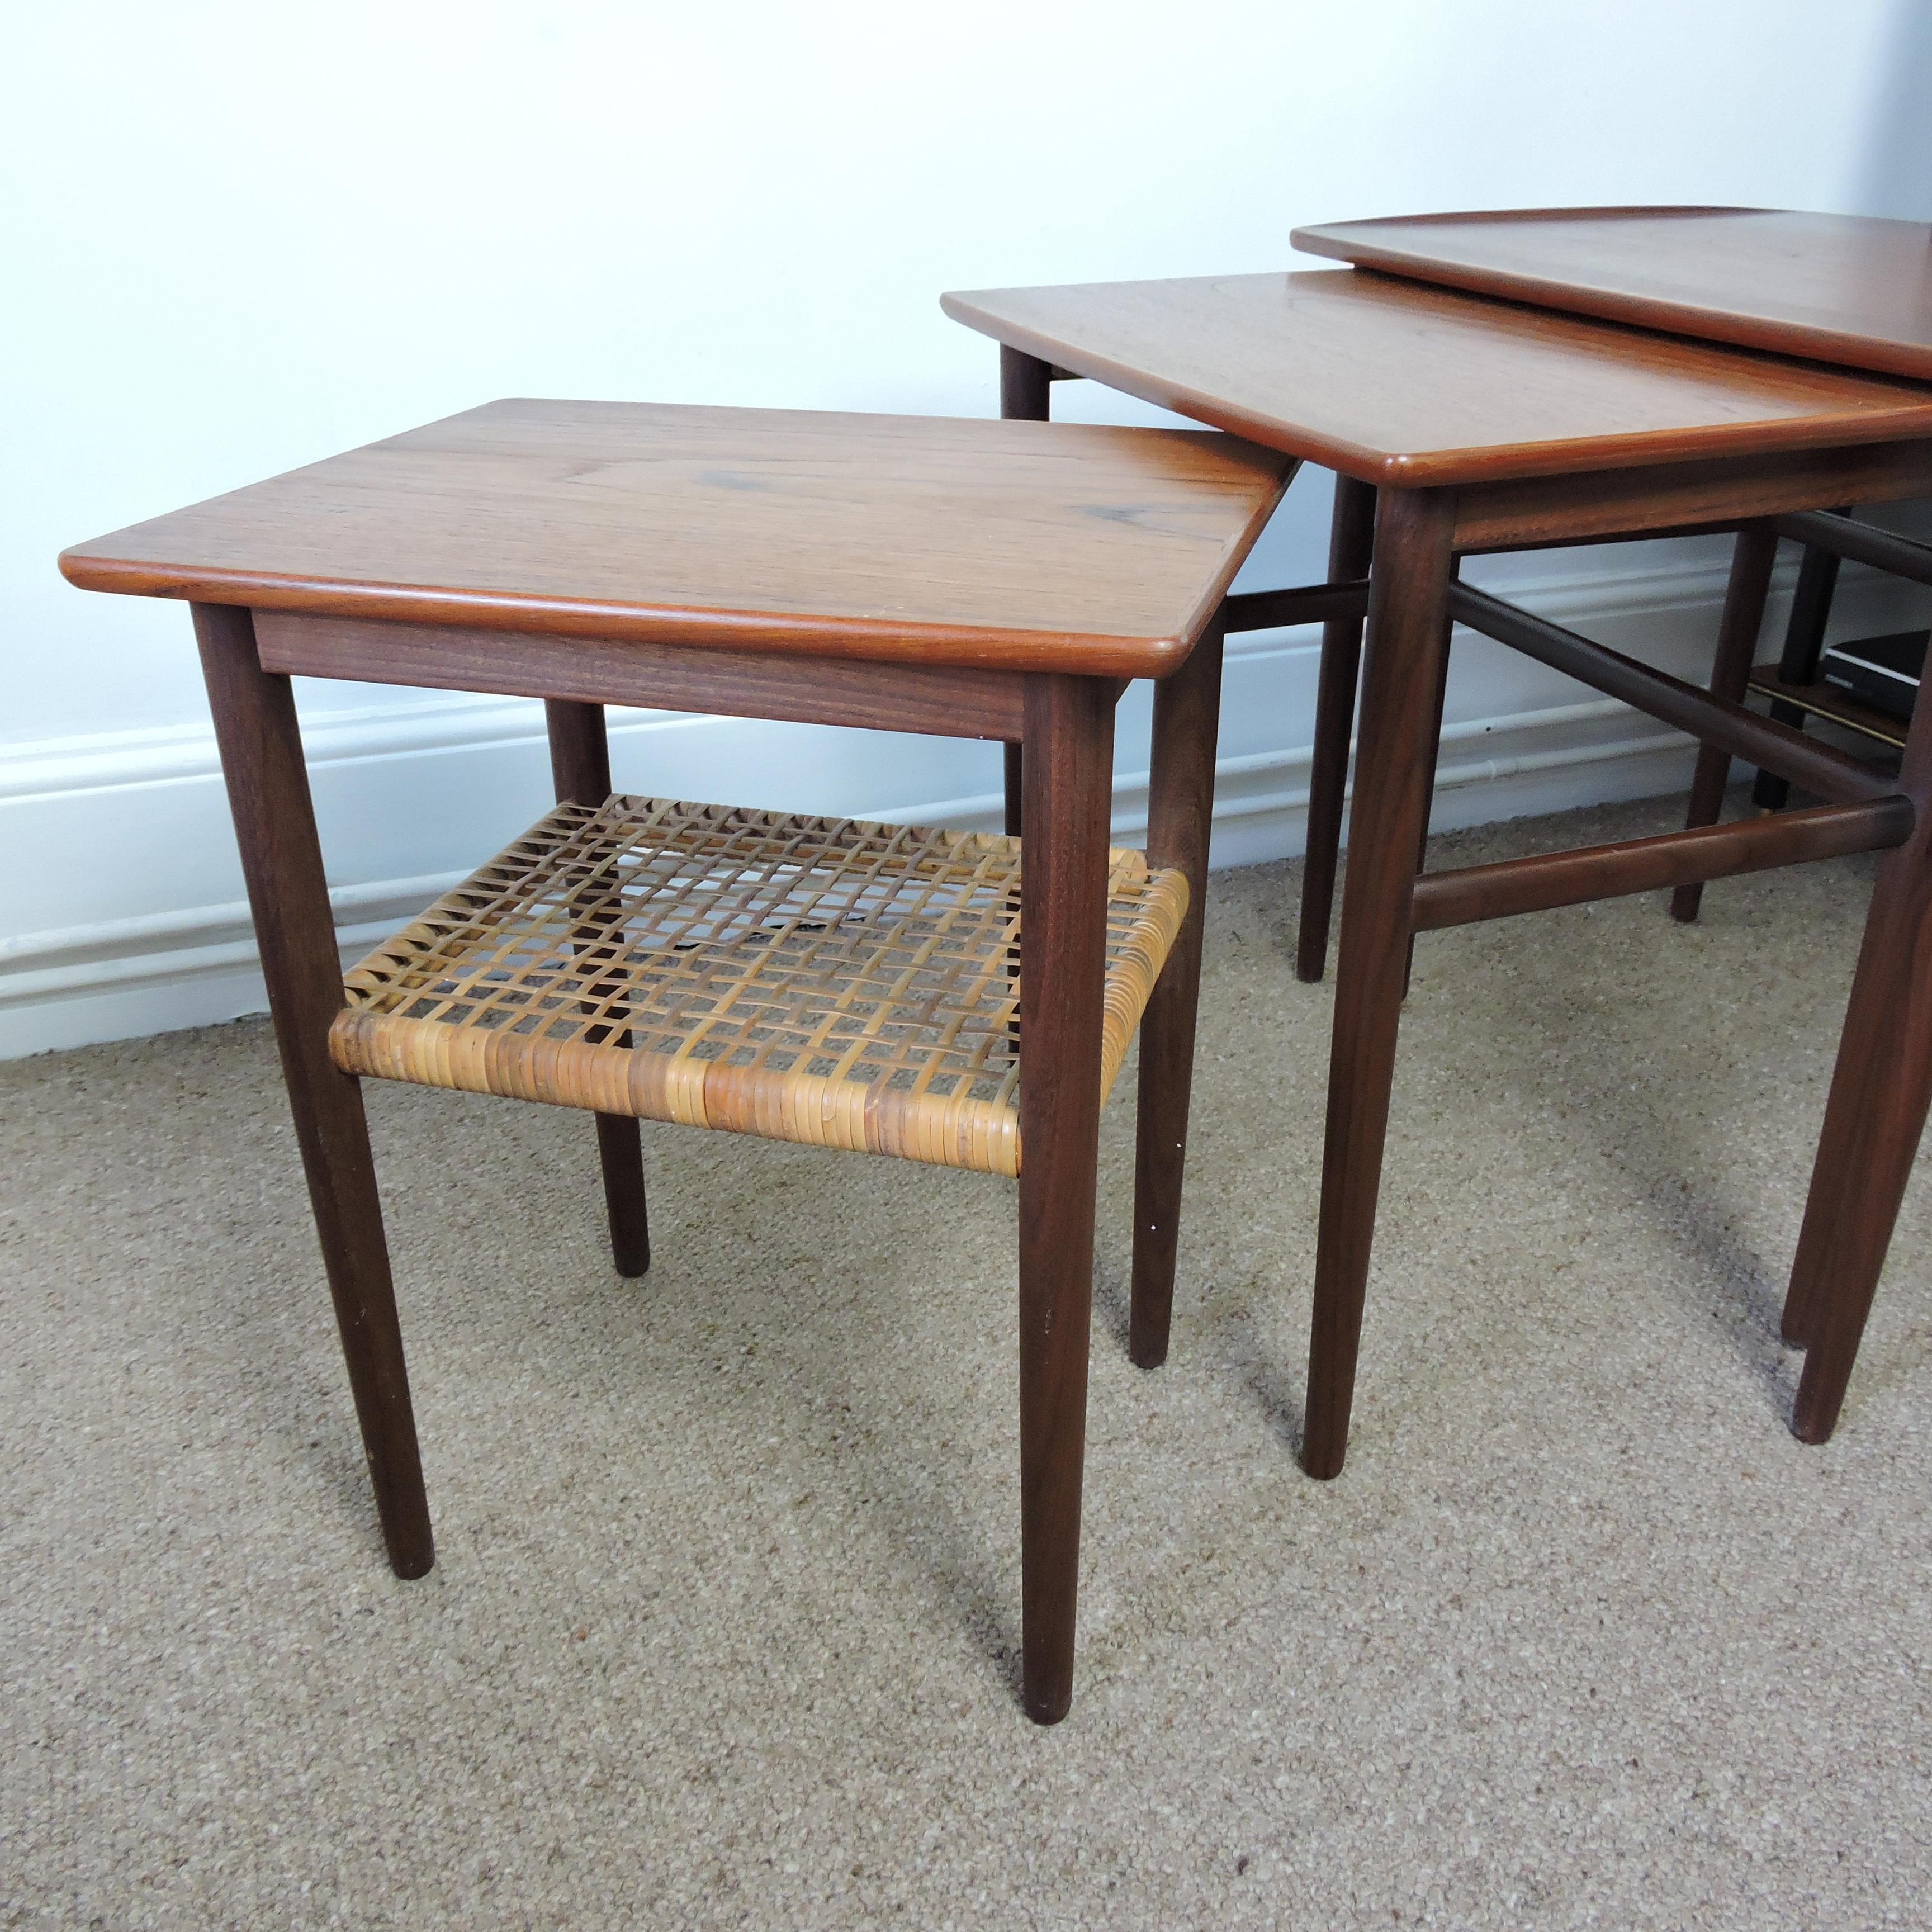 Midcentury Danish Teak and Cane Nesting Tables, 1950s For Sale 3